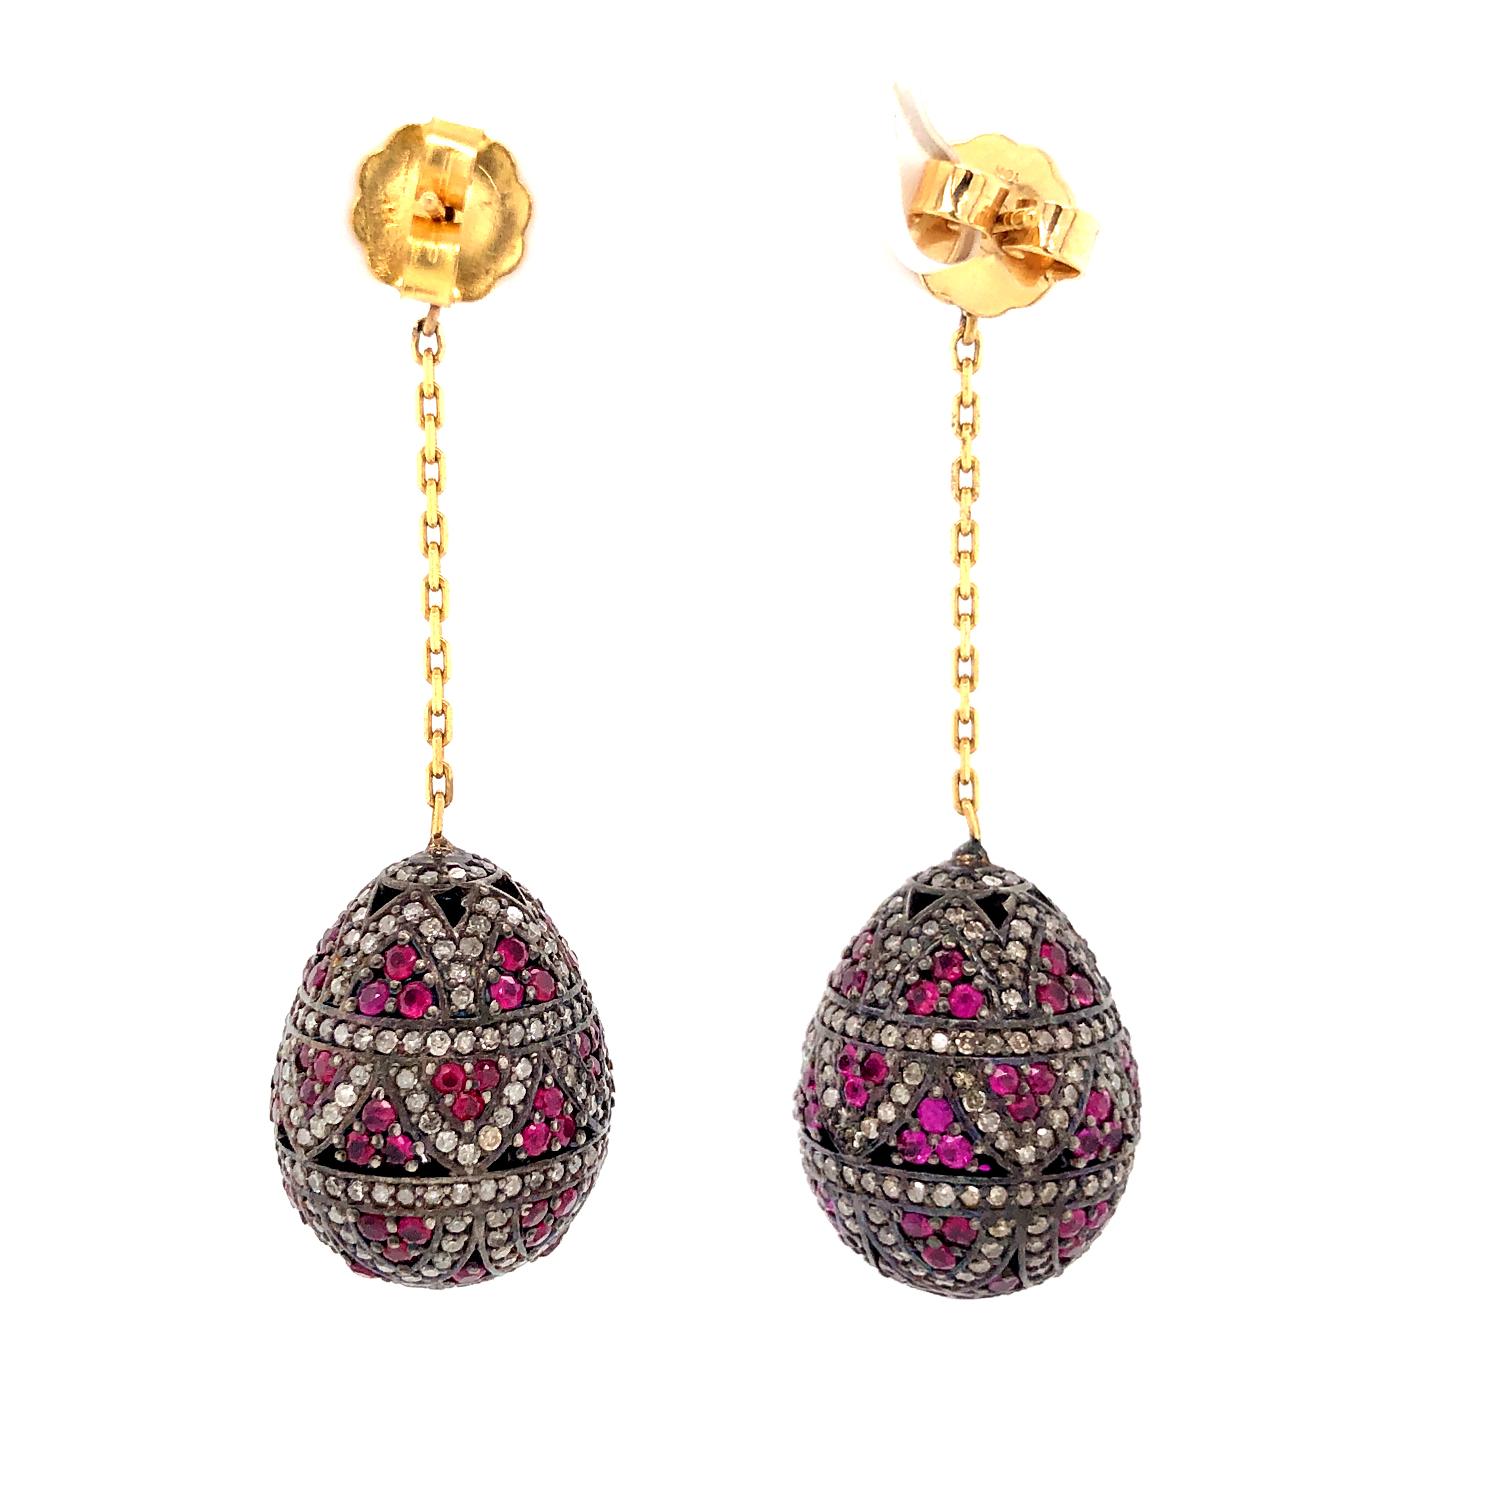 Mixed Cut Ruby & Pave Diamond Ball Earrings Made in 18k Gold & Silver For Sale